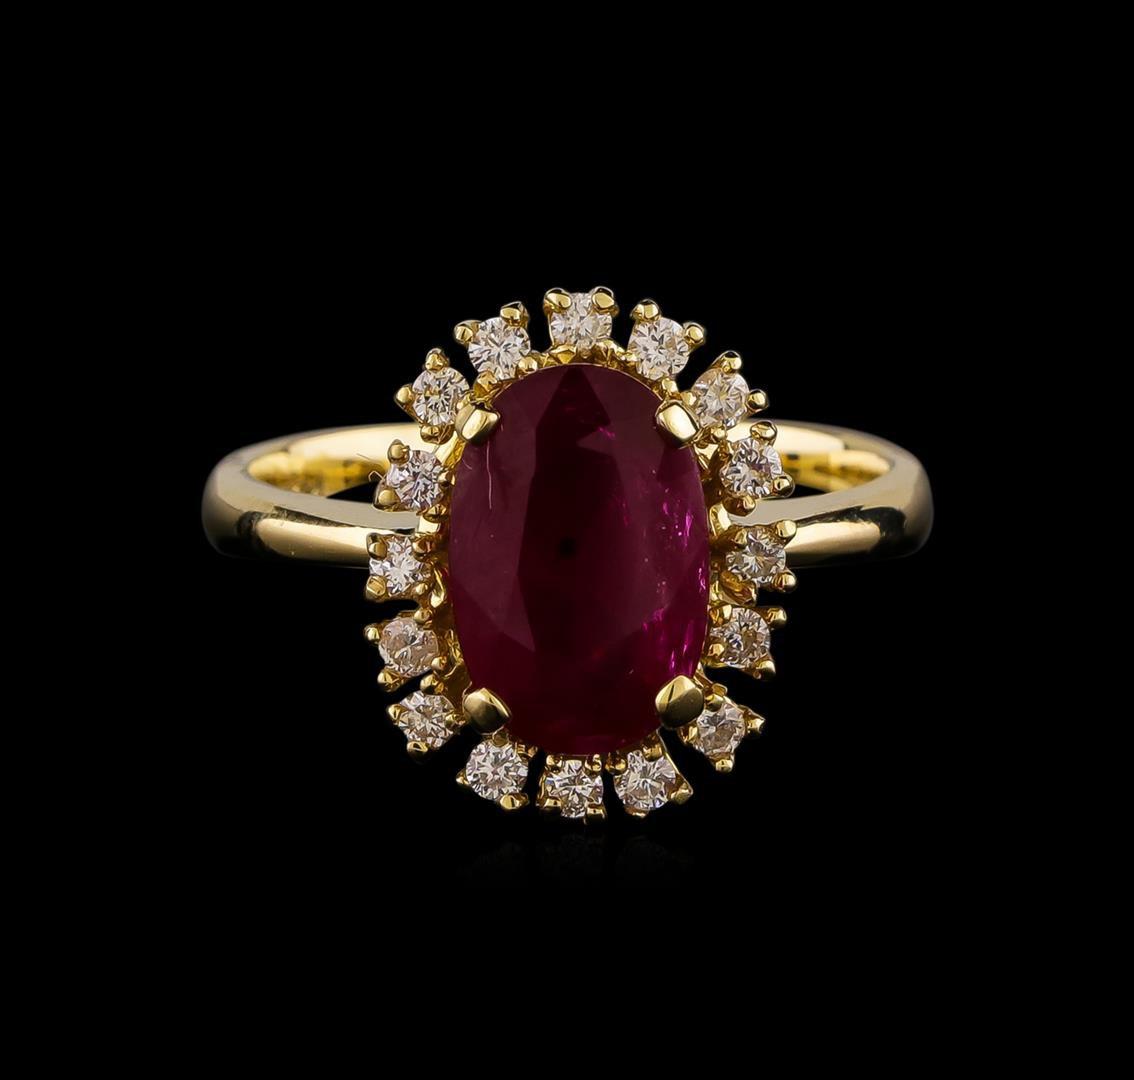 2.49 ctw Ruby and Diamond Ring - 14KT Yellow Gold